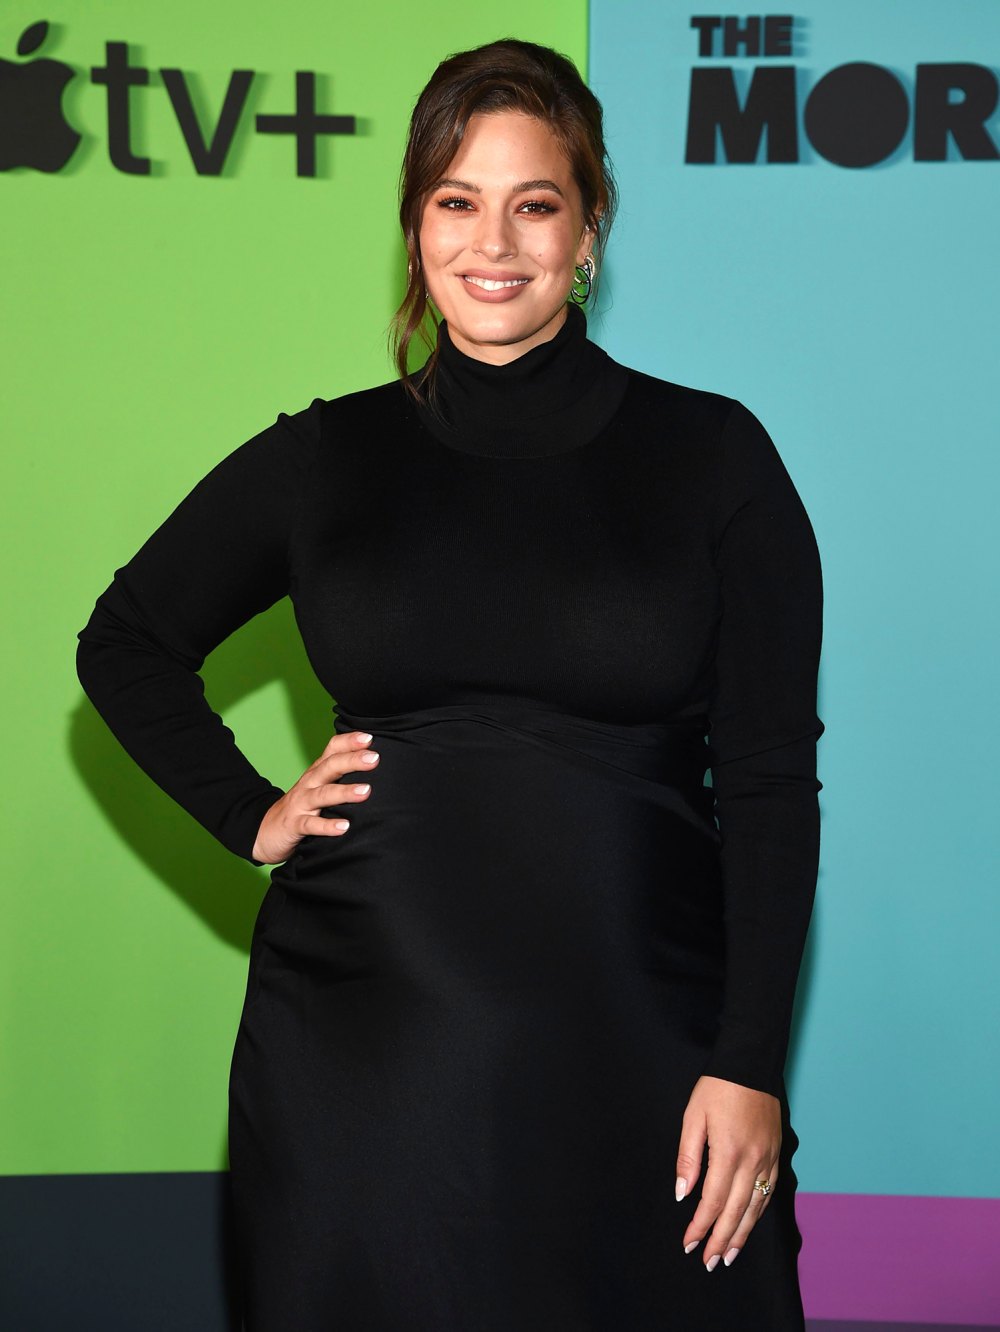 Pregnant Ashley Graham Shows Bare Baby Bump in Cowgirl-Inspired Maternity Shoot